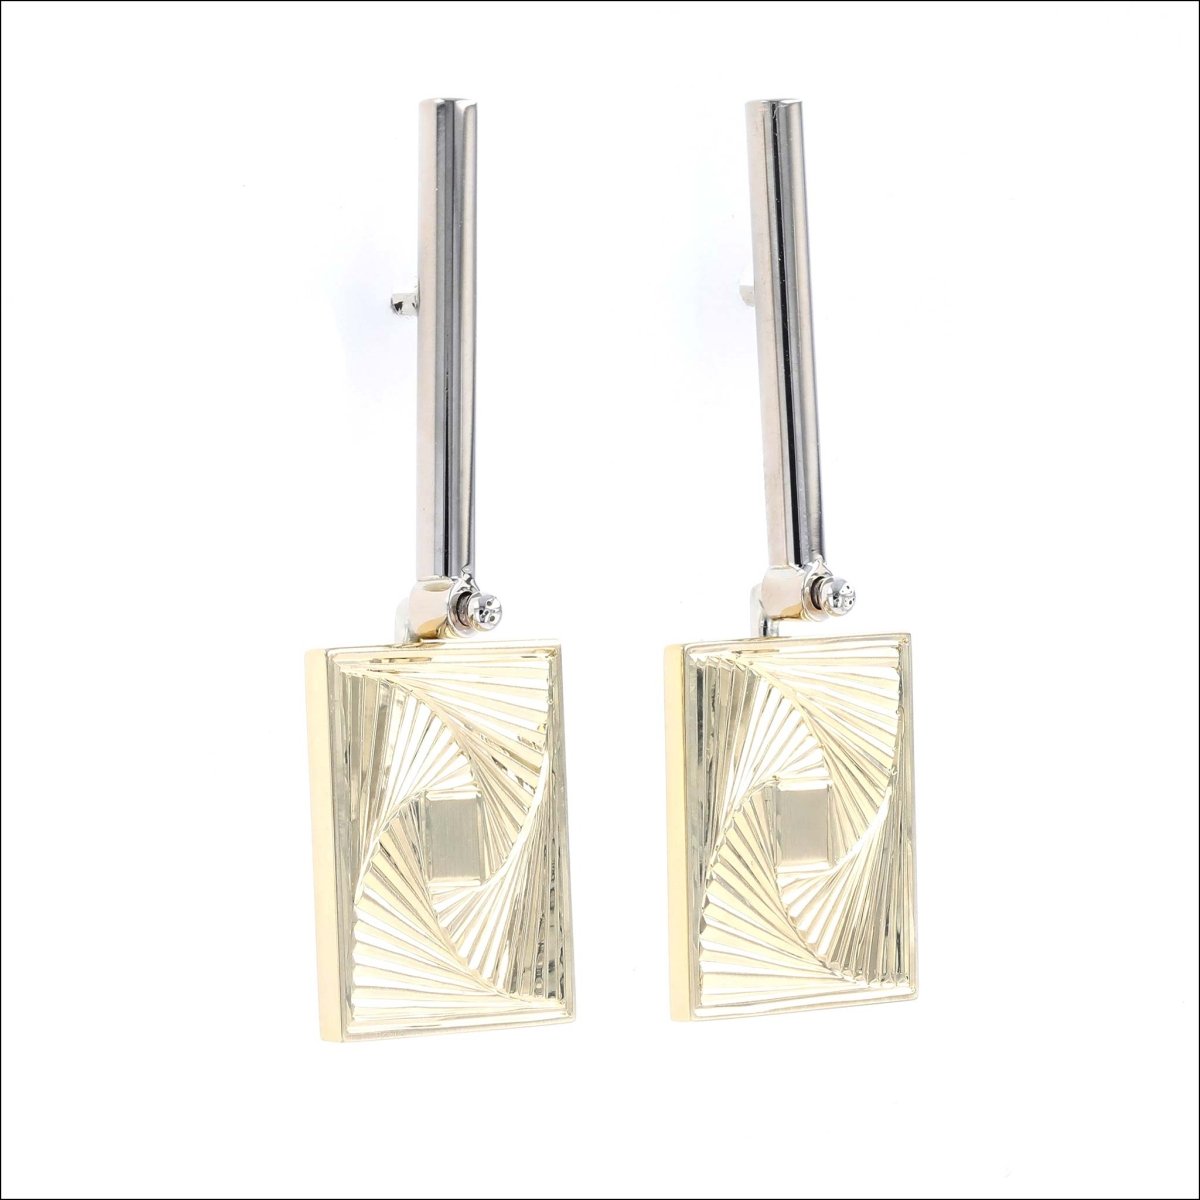 Hand Engraved Square Vortex Earrings 18KY 14KW Entry #1 - JewelsmithEarrings